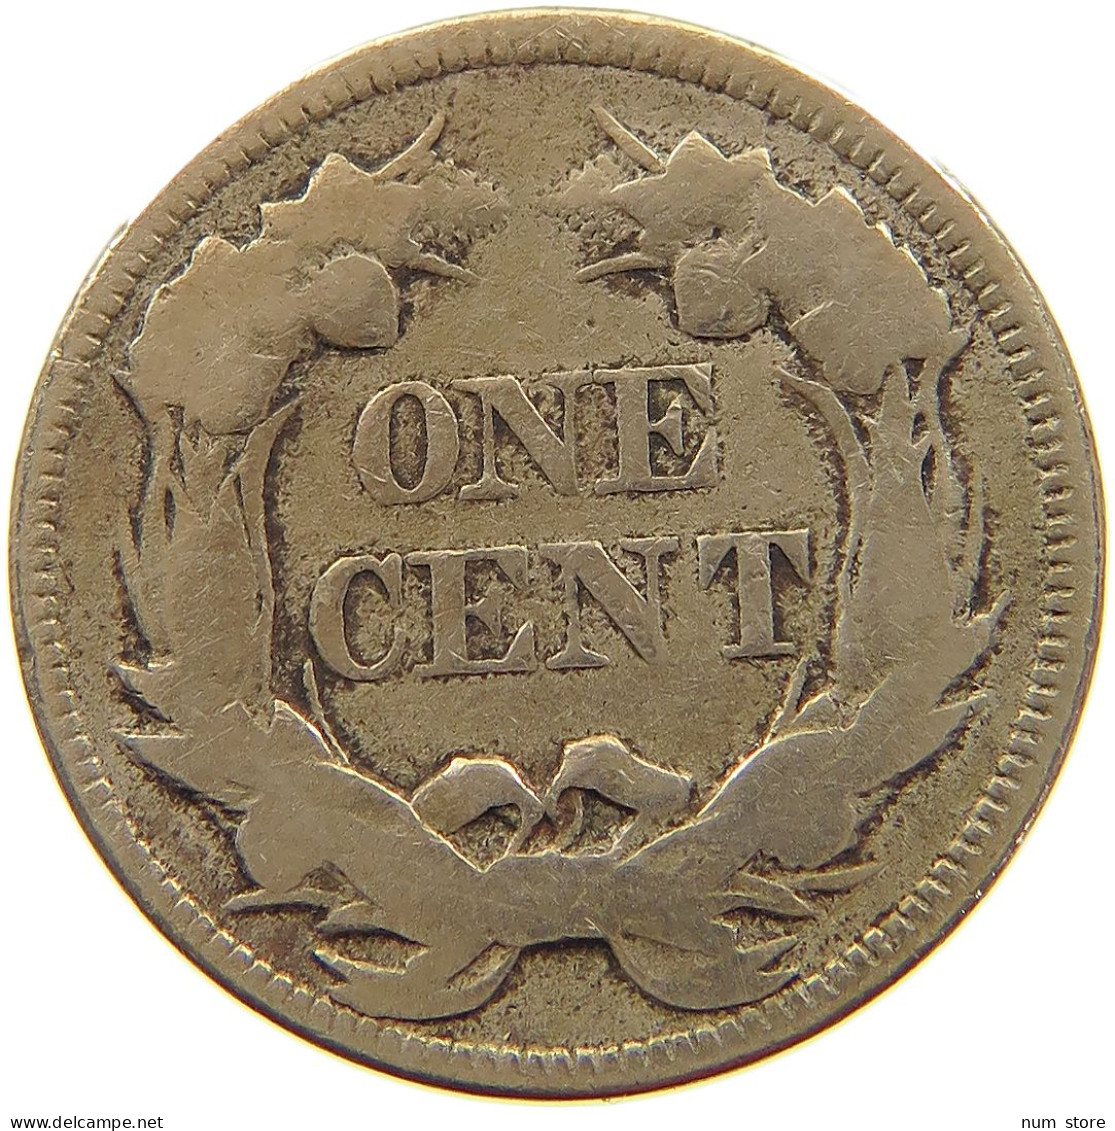 UNITED STATES OF AMERICA CENT 1857 FLYING EAGLE #a014 0015 - 1856-1858: Flying Eagle